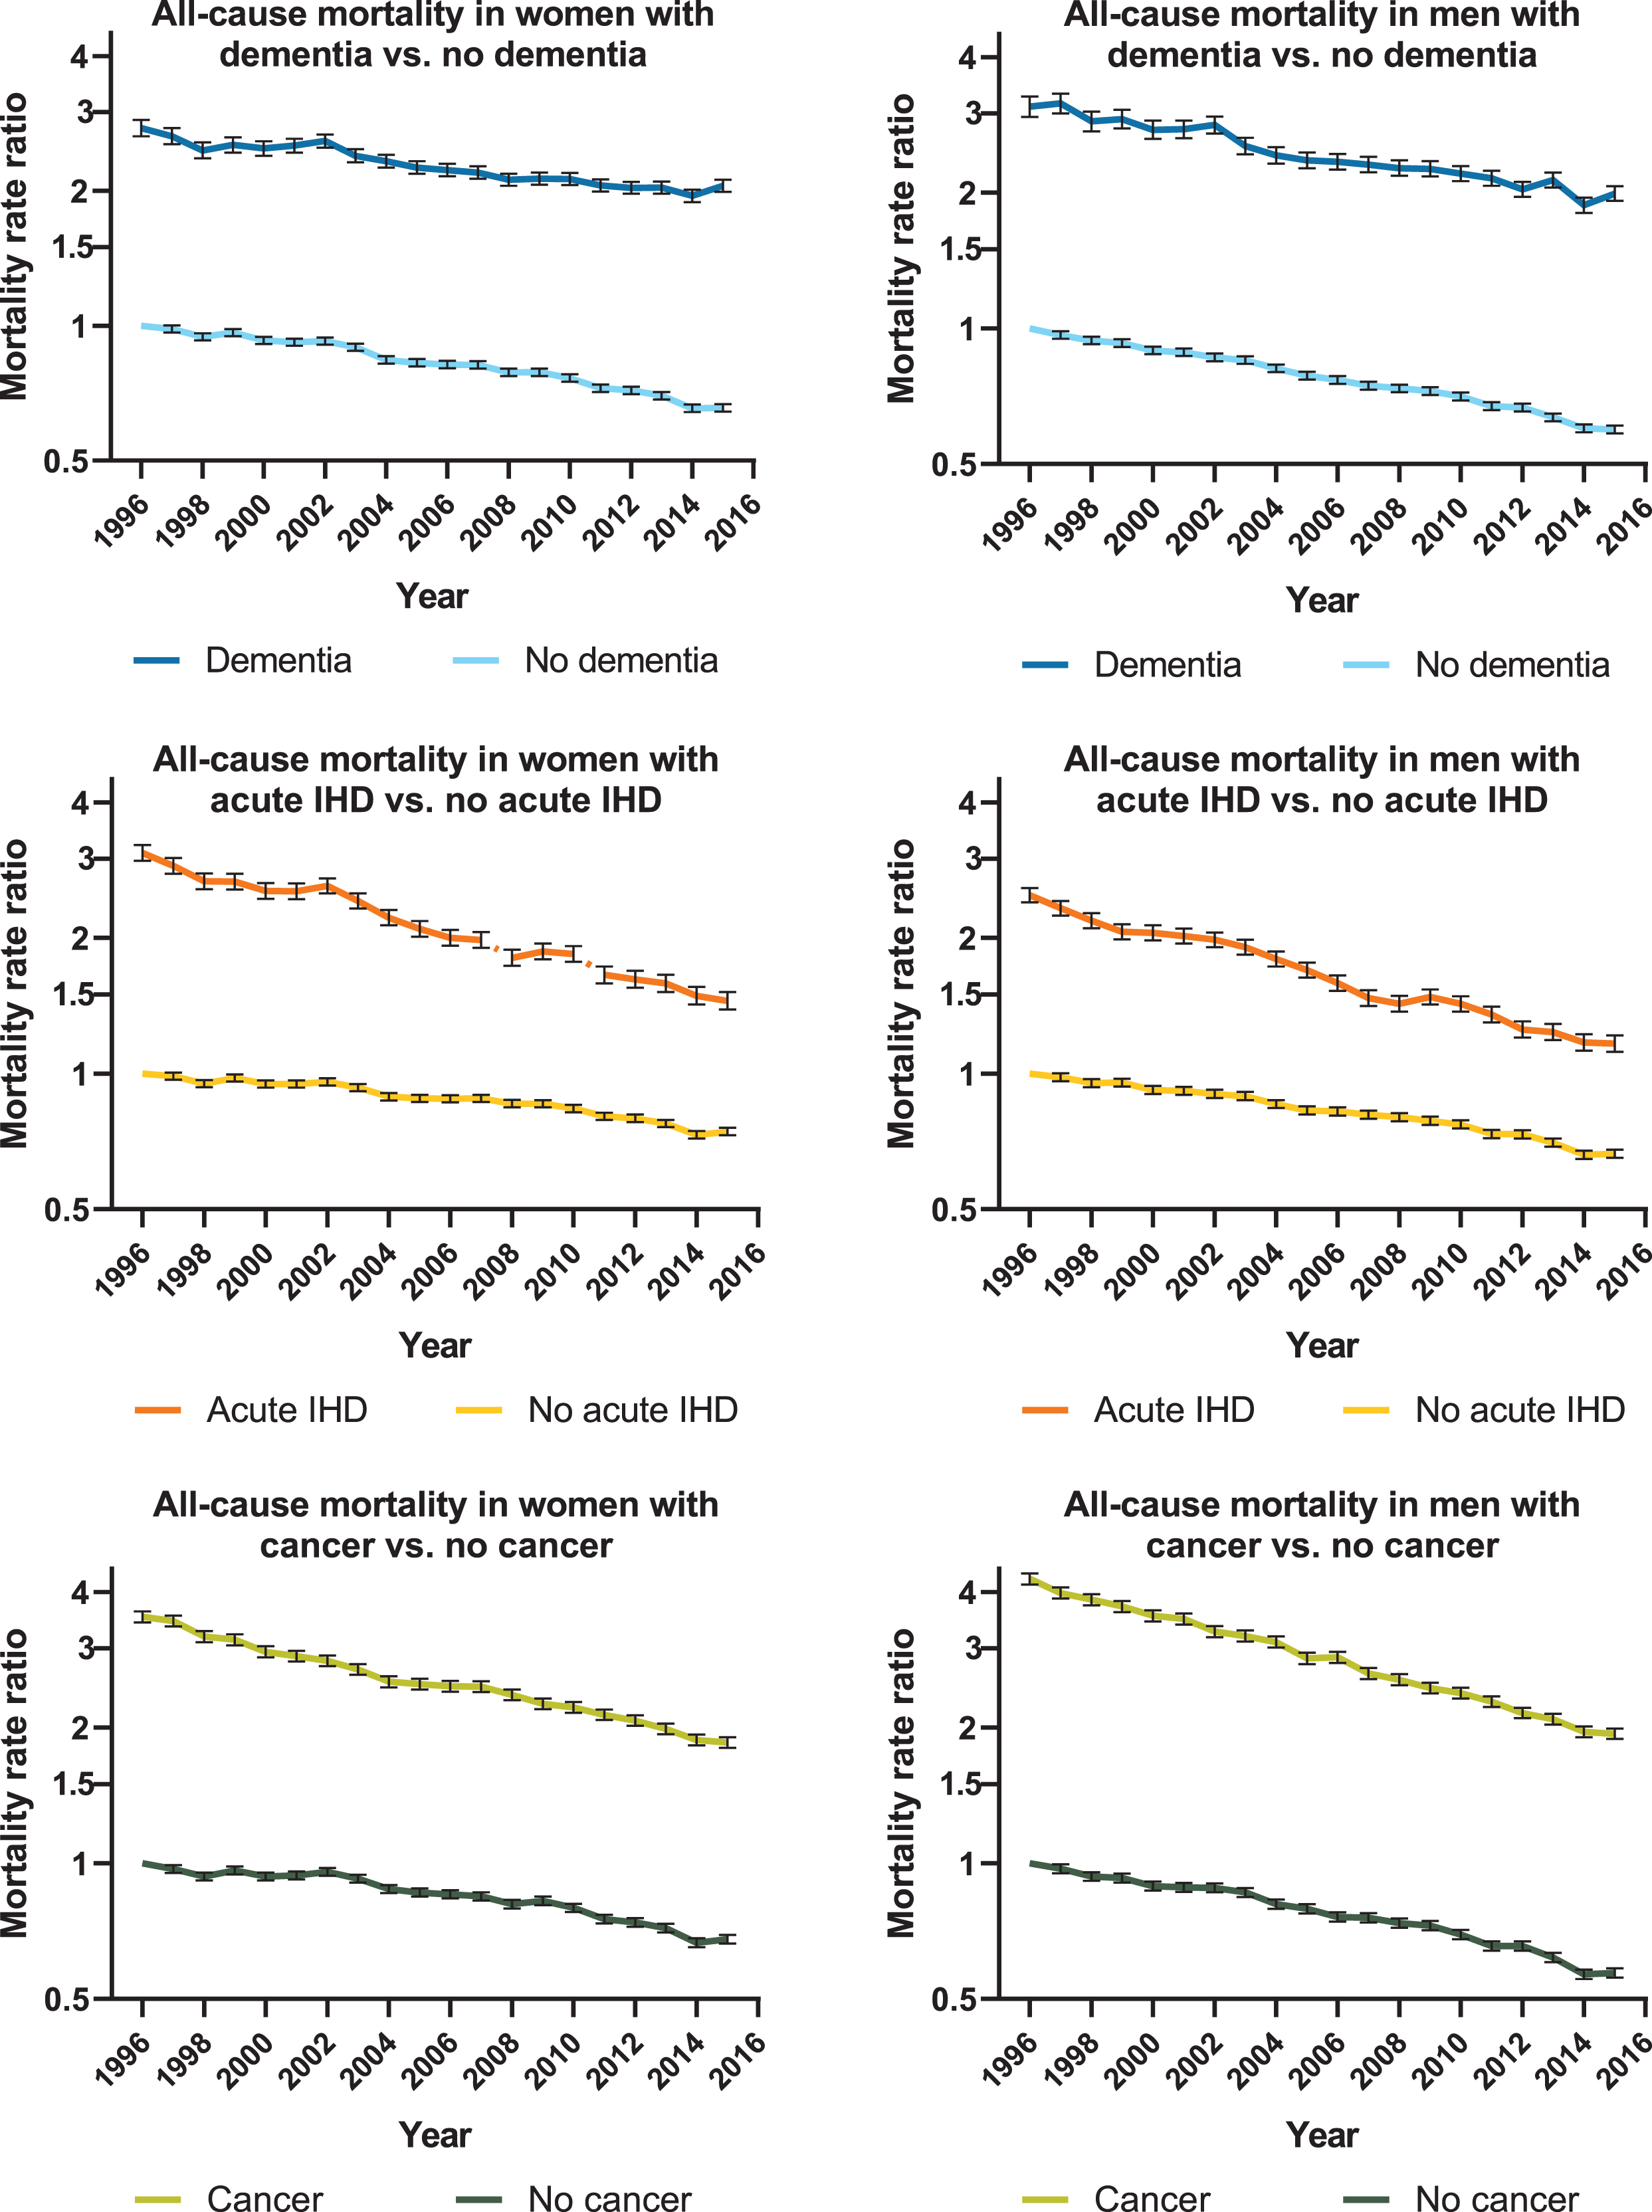 Time trend of all-cause mortality for women and men. Graphs showing age-adjusted mortality rate ratios for women and men with dementia, acute ischemic heart disease (IHD), and cancer compared to people without. The reference value was defined as 1.00 in 1996 for women and men without dementia, acute IHD, and cancer. Error bars represent 95%confidence interval.